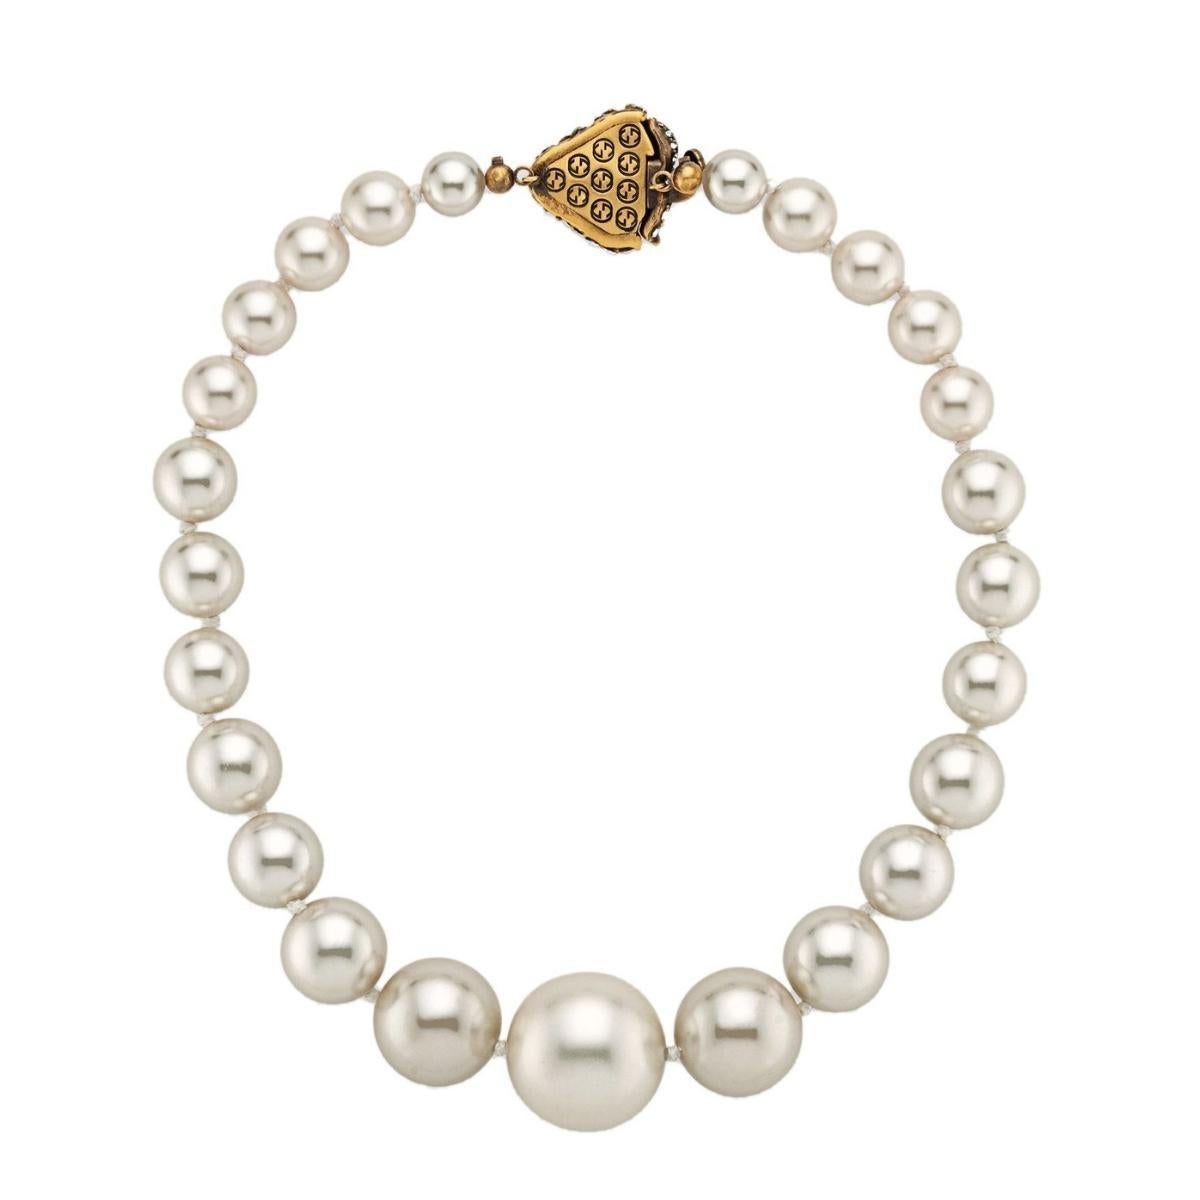 Pearl-effect stones grace the strand of this necklace with the iconic GG logo scattered throughout. Crystal-embellished clasp fastening that comes in the quirky shape of a strawberry- inspired by archival cartoon prints from the ‘70s.
Metal,